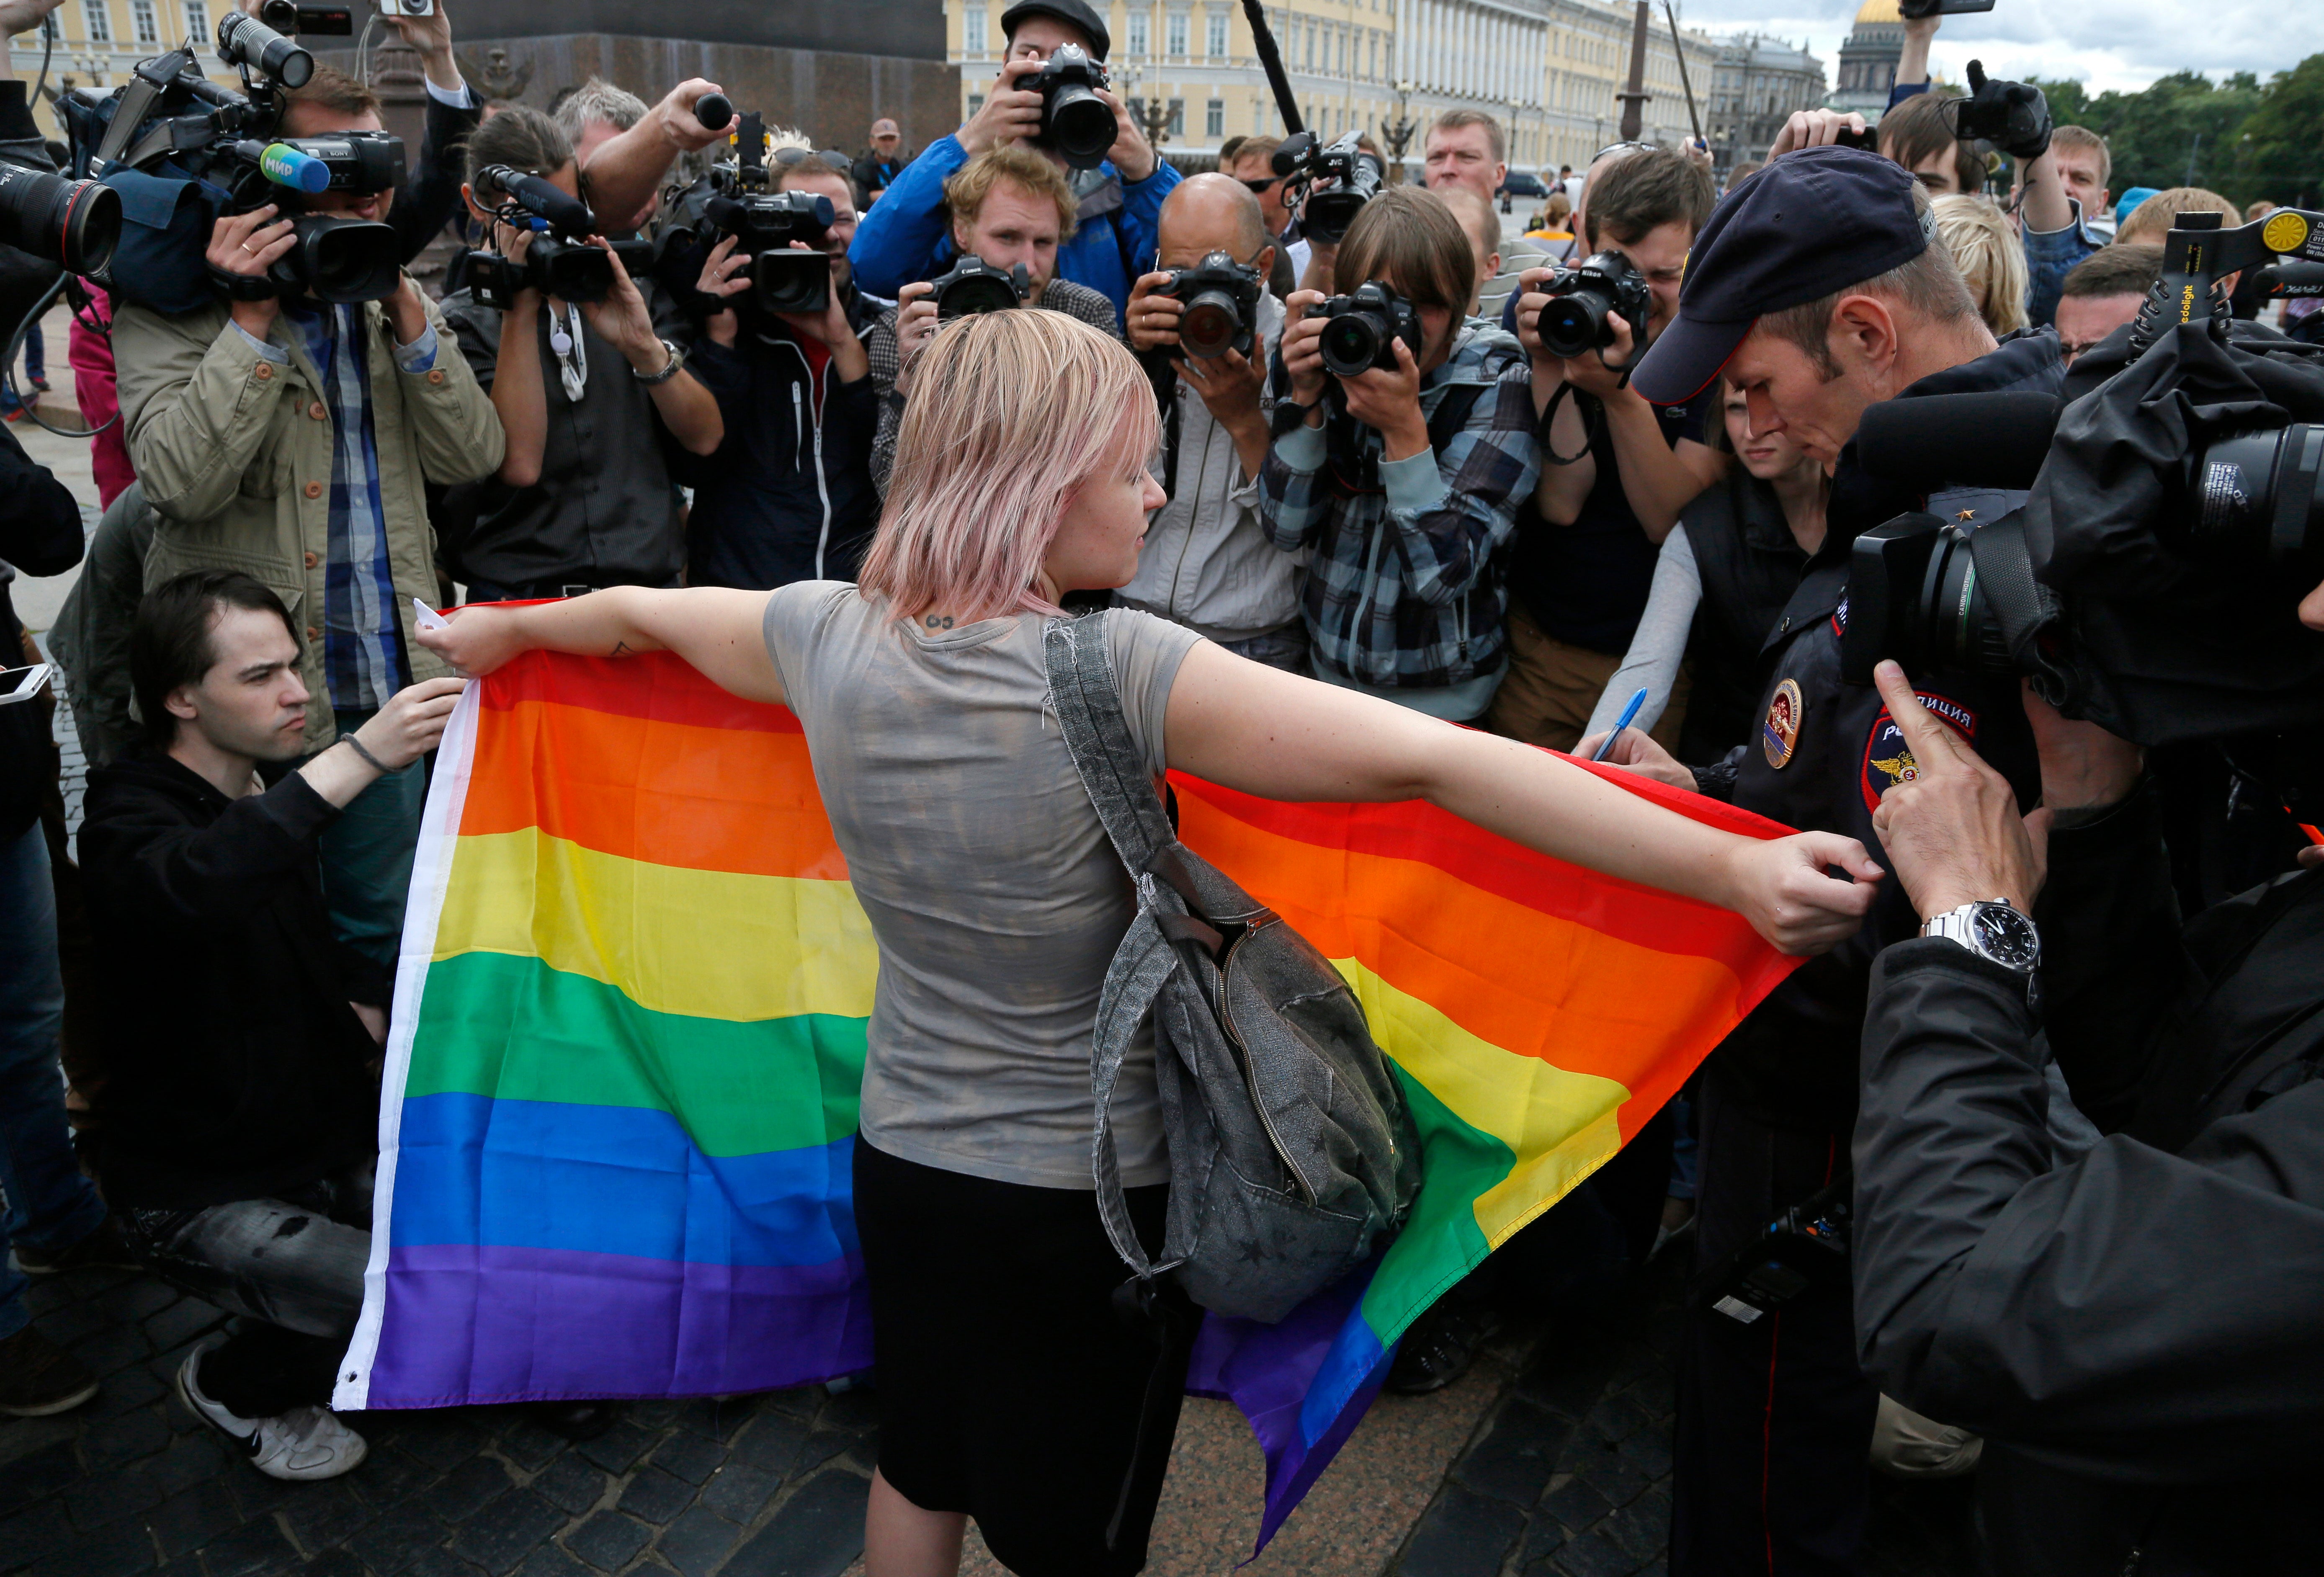 A gay rights activist stands with a rainbow flag, in front of journalists, during a protest in Russia